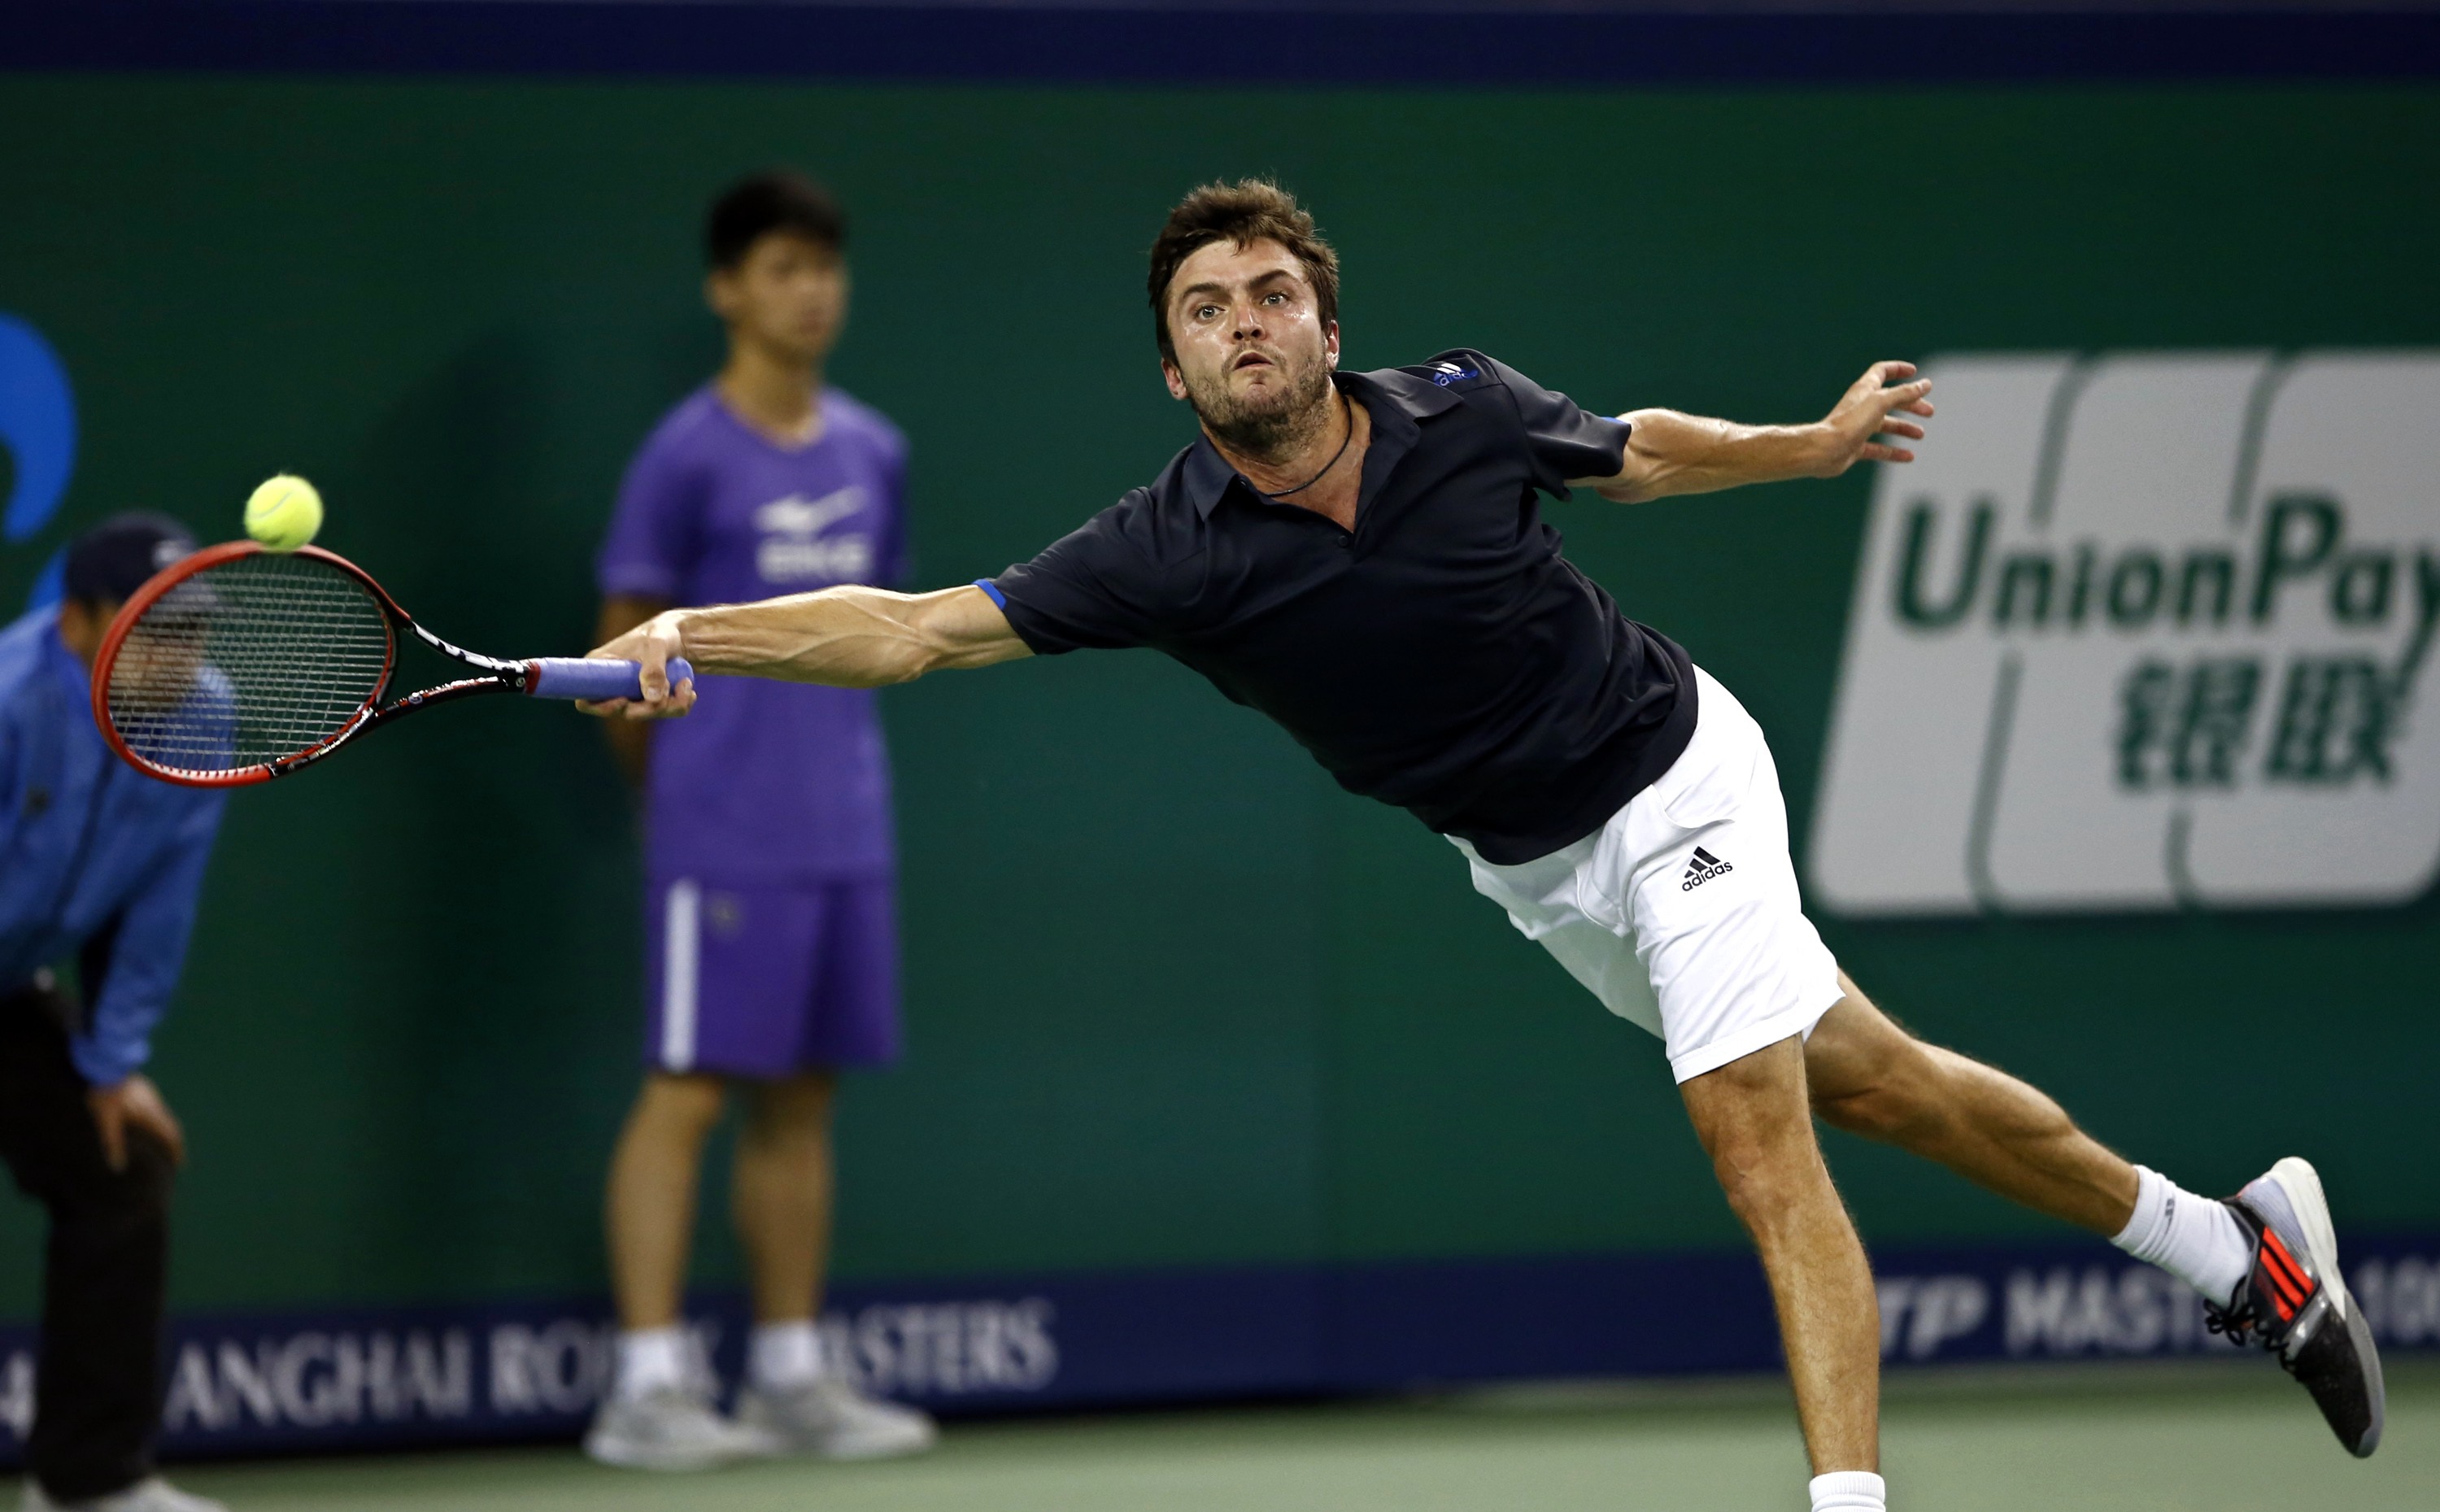 Gilles Simon of France returns a shot to Roger Federer of Switzerland during the men's singles final match at the Shanghai Masters tennis tournament in Shanghai October 12, 2014. REUTERS/Aly Song (CHINA - Tags: SPORT TENNIS)